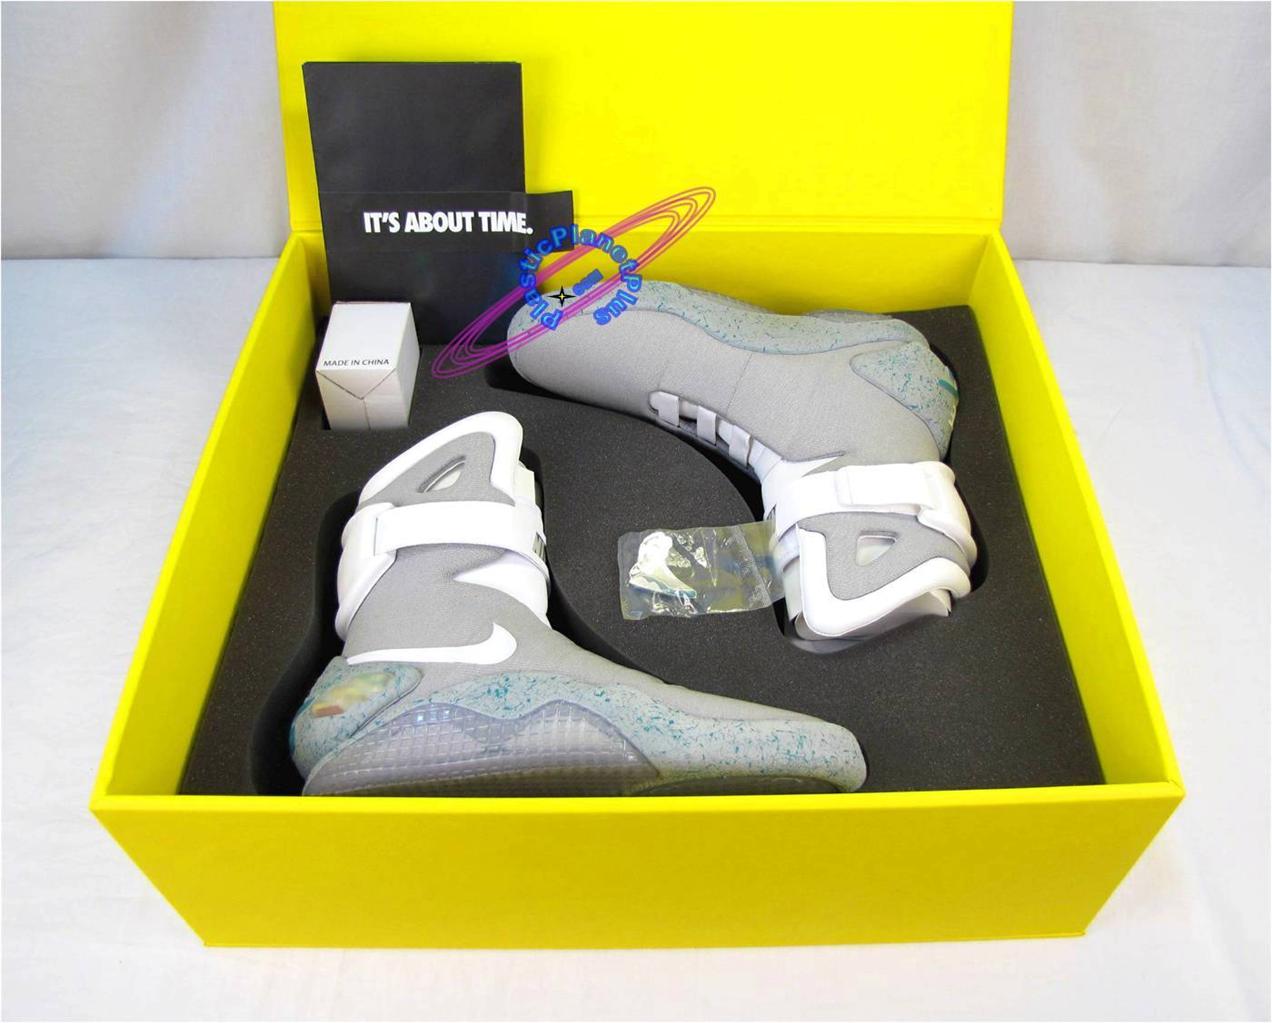 Alianza Contribuyente puede nike air mag box for sale, Off 60% ,amitsagrawal.com